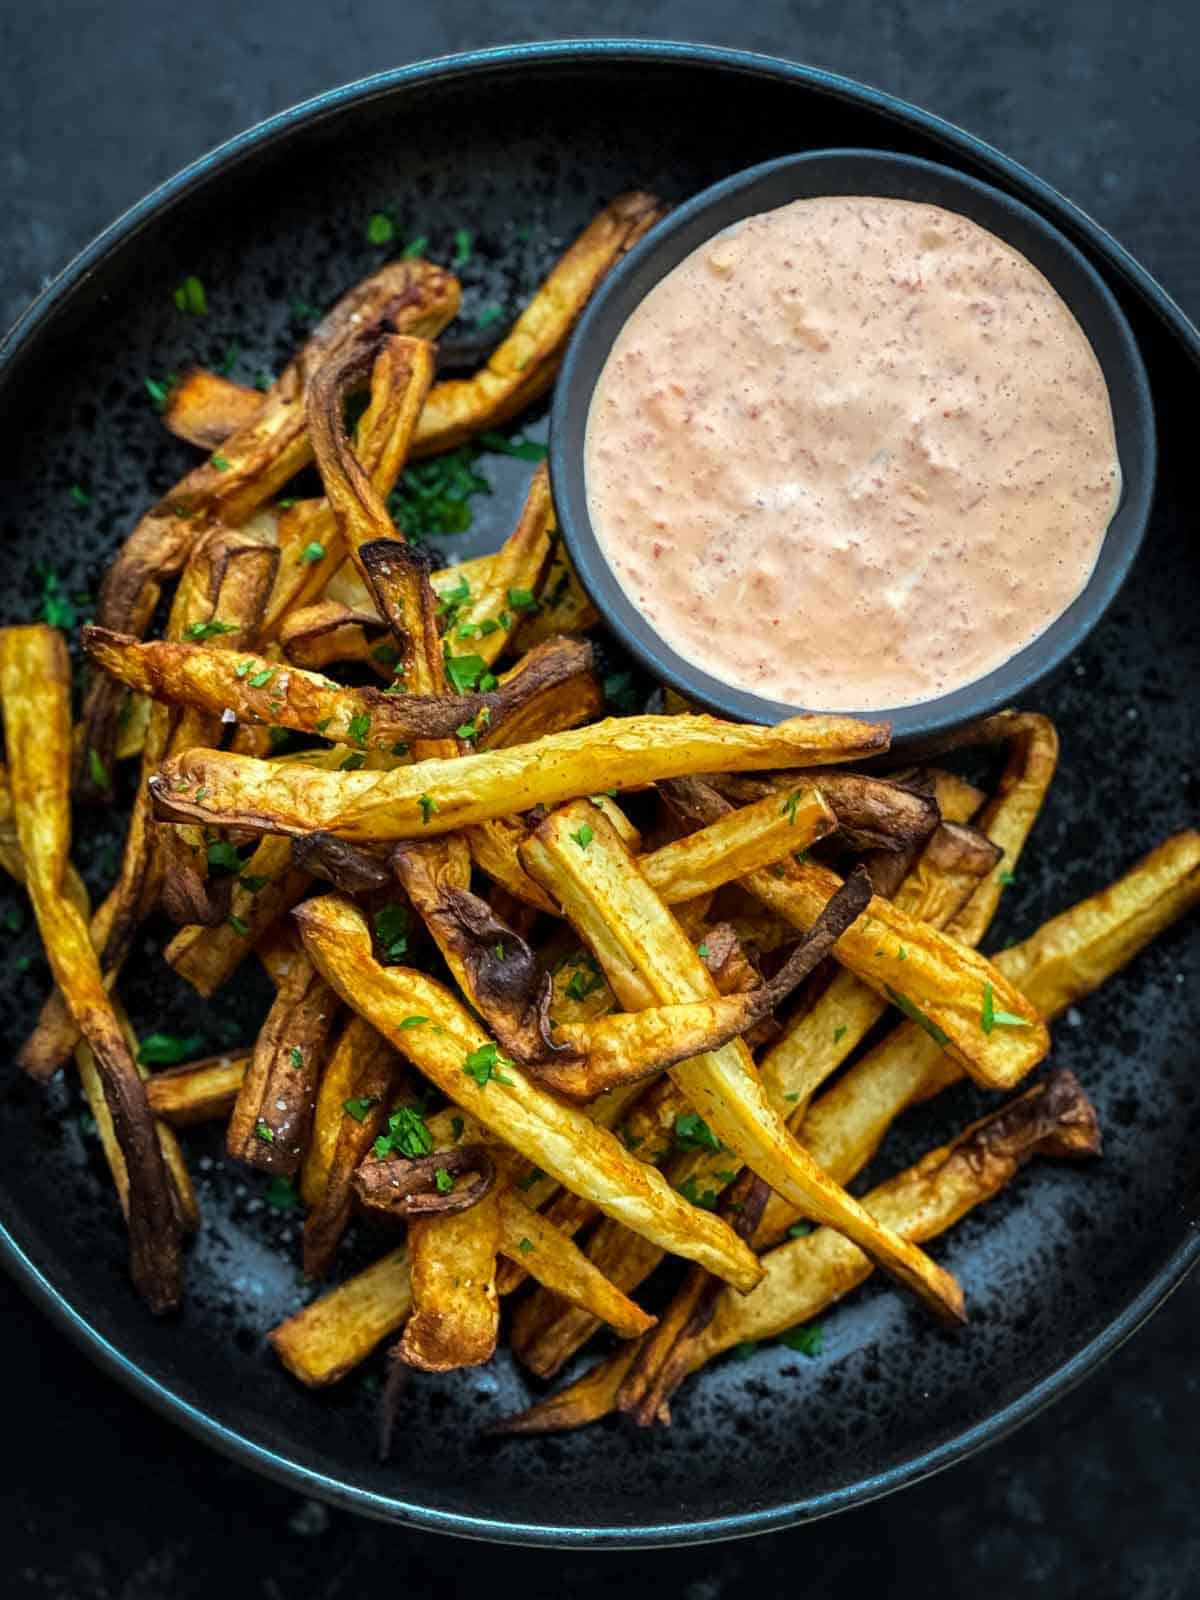 Parsnip fries on a black plate with a dipping sauce to the side